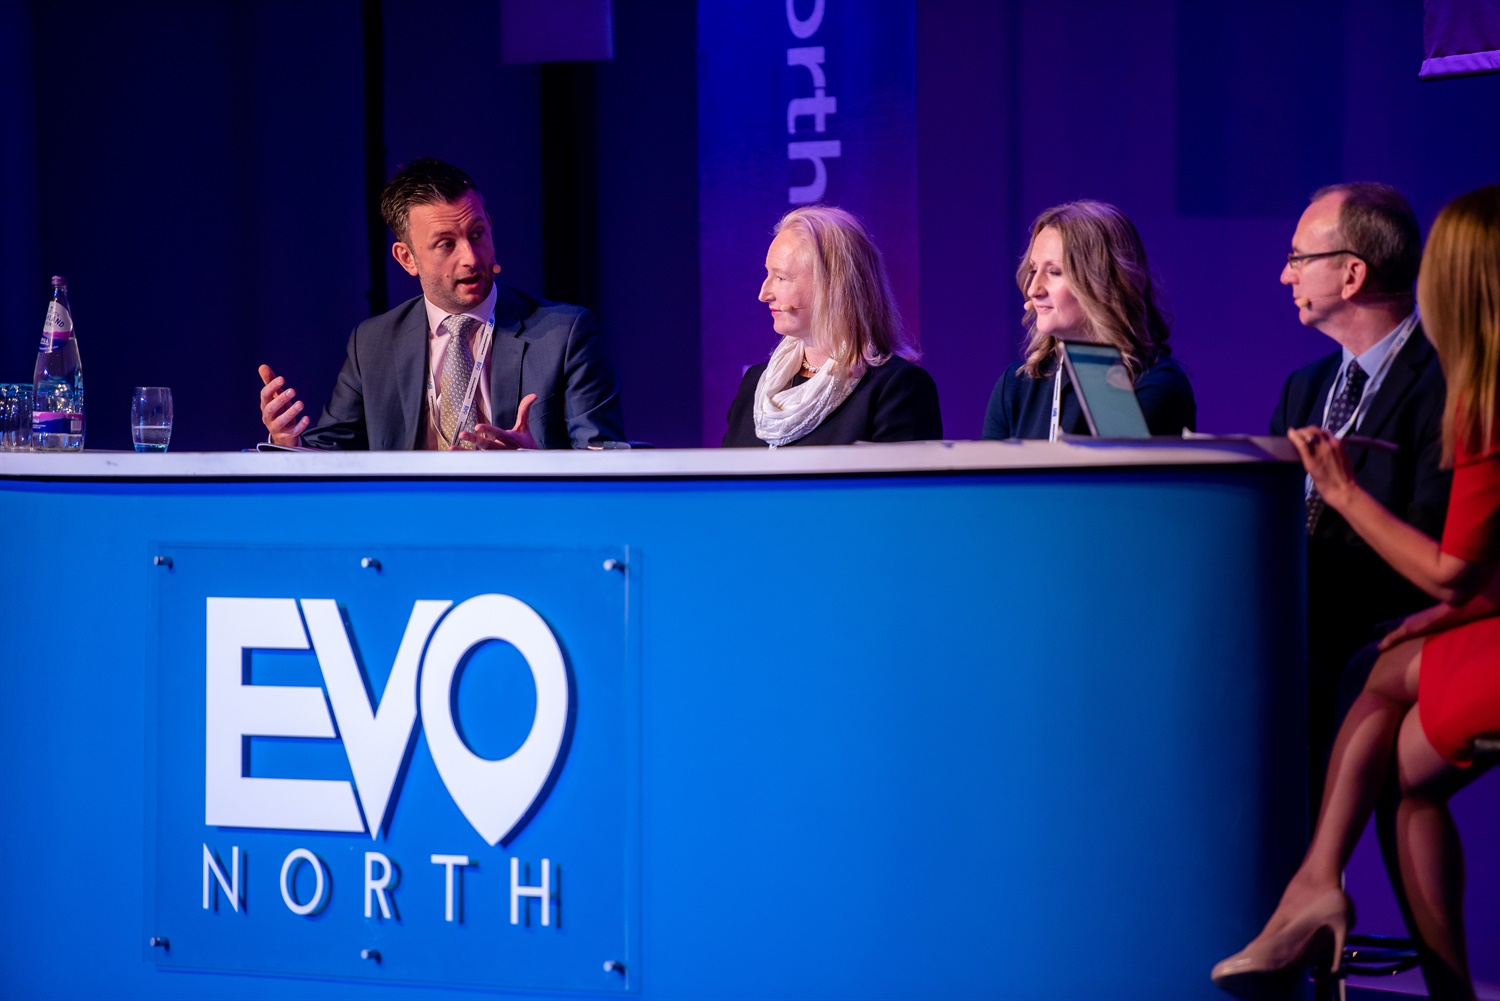 Transport and Connectivity at EvoNorth 2019